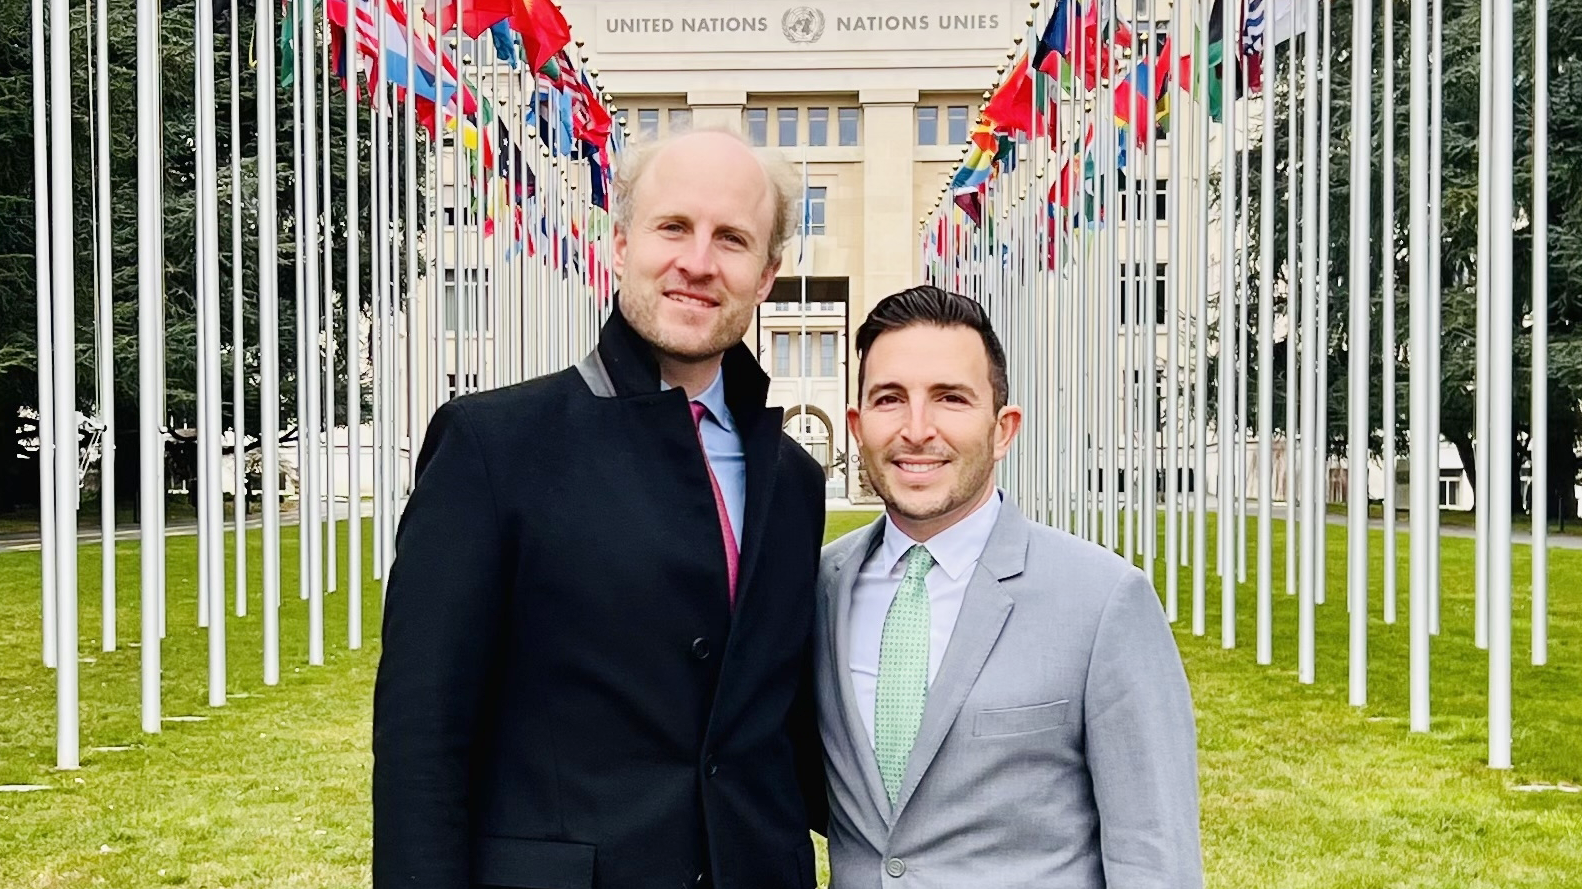 two people wearing suits are standing alongside each other. Bright green grass is on the ground and long rows of international flags line the yard behind them. They are standing at the UN